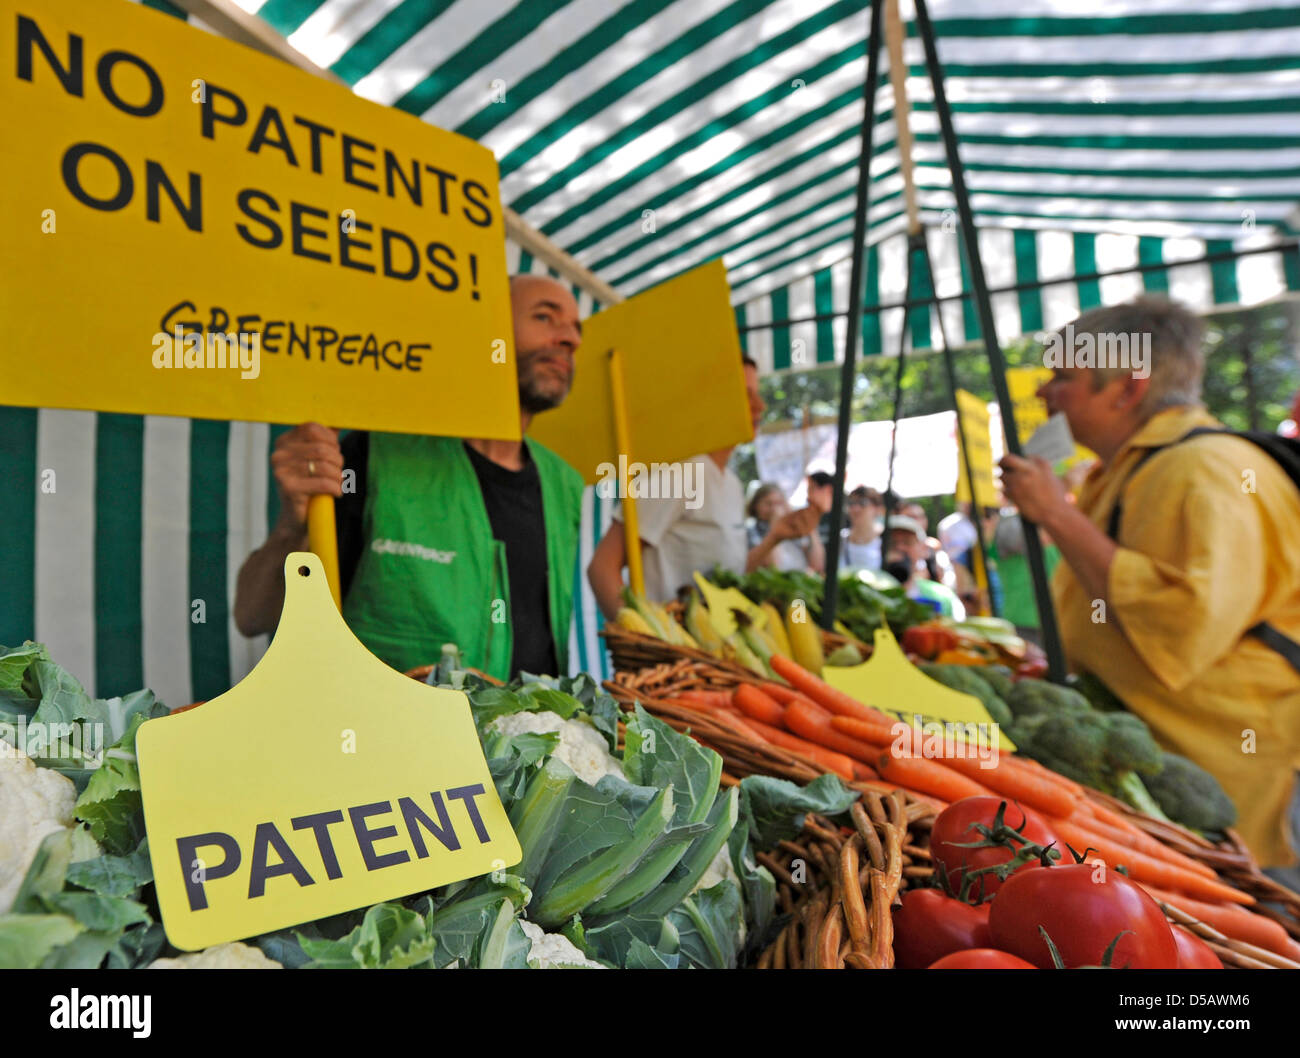 Several Greenpeace activists show signs saying 'No patents on seeds' and 'Keine Patente auf Saatgut' at a vegetable stand in front of the European Patent Office (EPO) in Munich, Germany, 20 July 2010. The British company Plant Bioscience had patented the production of a special variant of Broccoli in 2002. On 20 and 21 July, the EPO's Enlarged Board of Appeal will hear the case. Ph Stock Photo